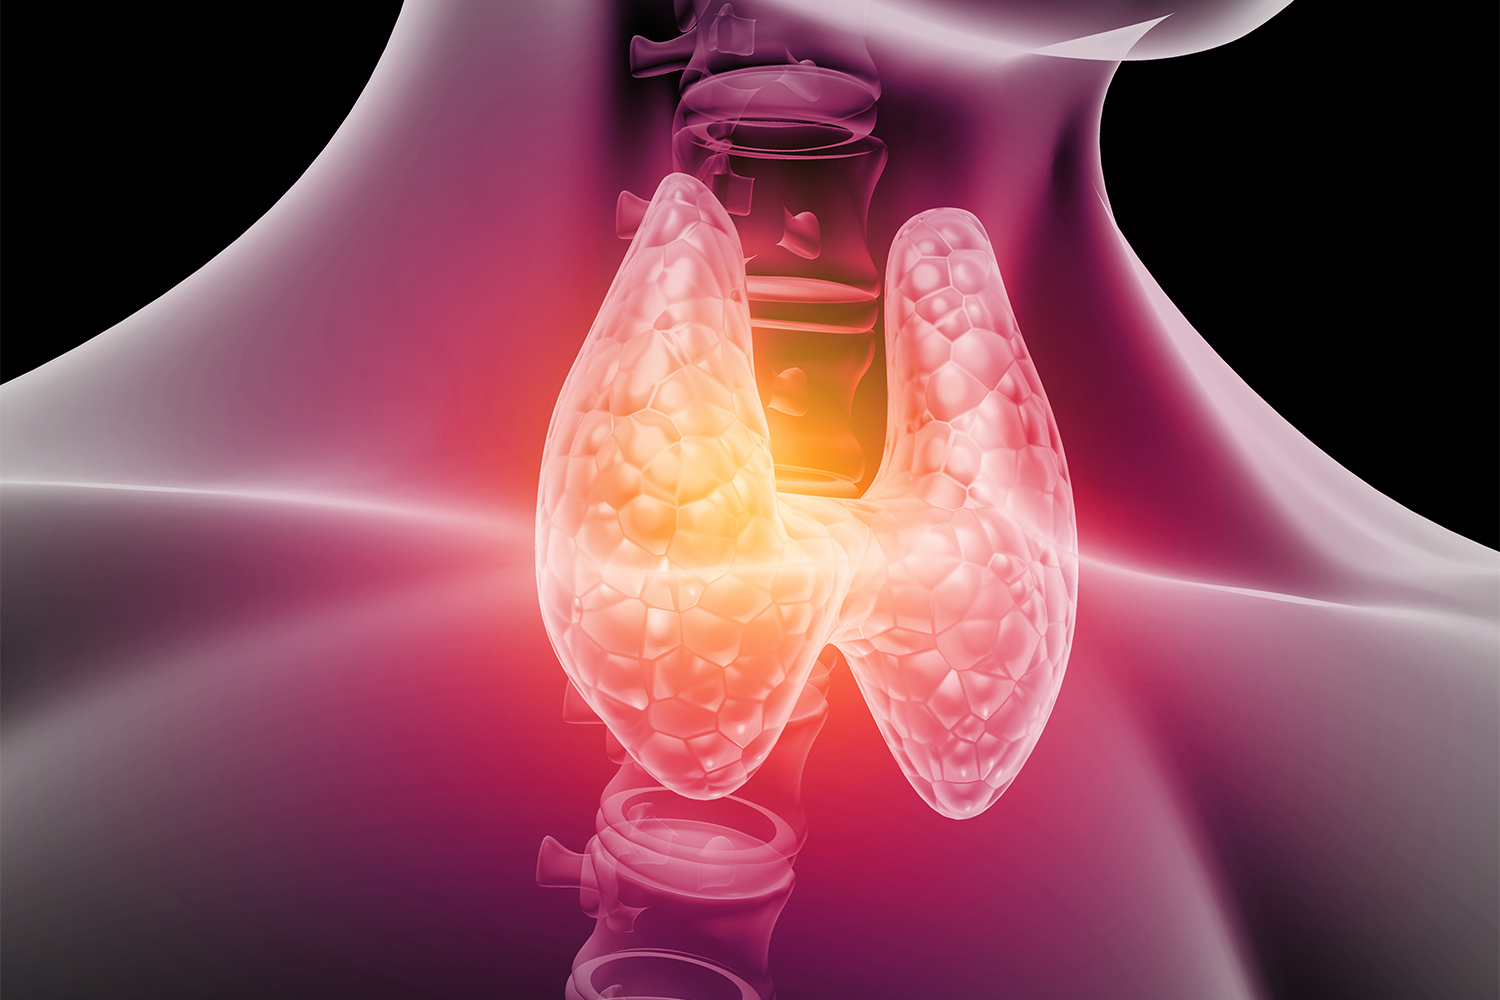 How Does the Thyroid Affect The Body?